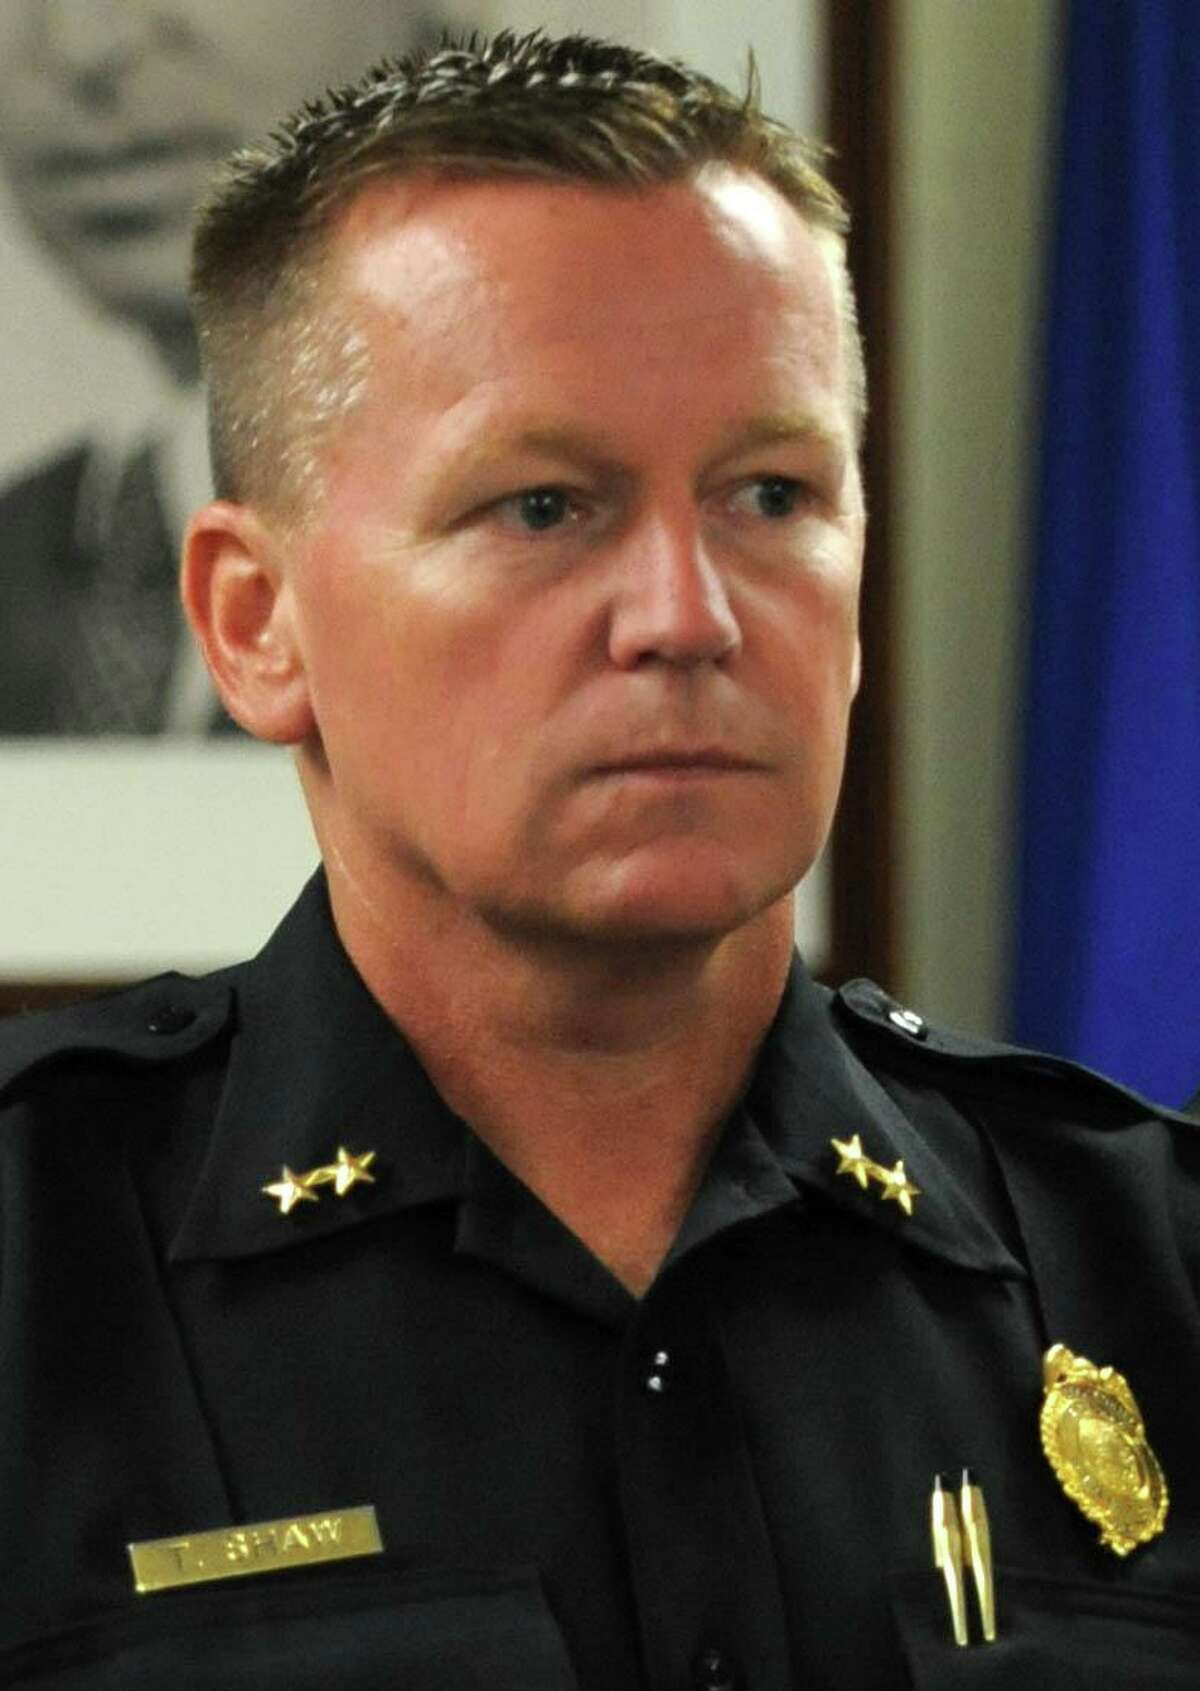 Stamford Police Assistant Chief Timothy Shaw announced Tuesday, May 12, 2015, that he will be leaving the department to become the chief of the Easton Police Department.